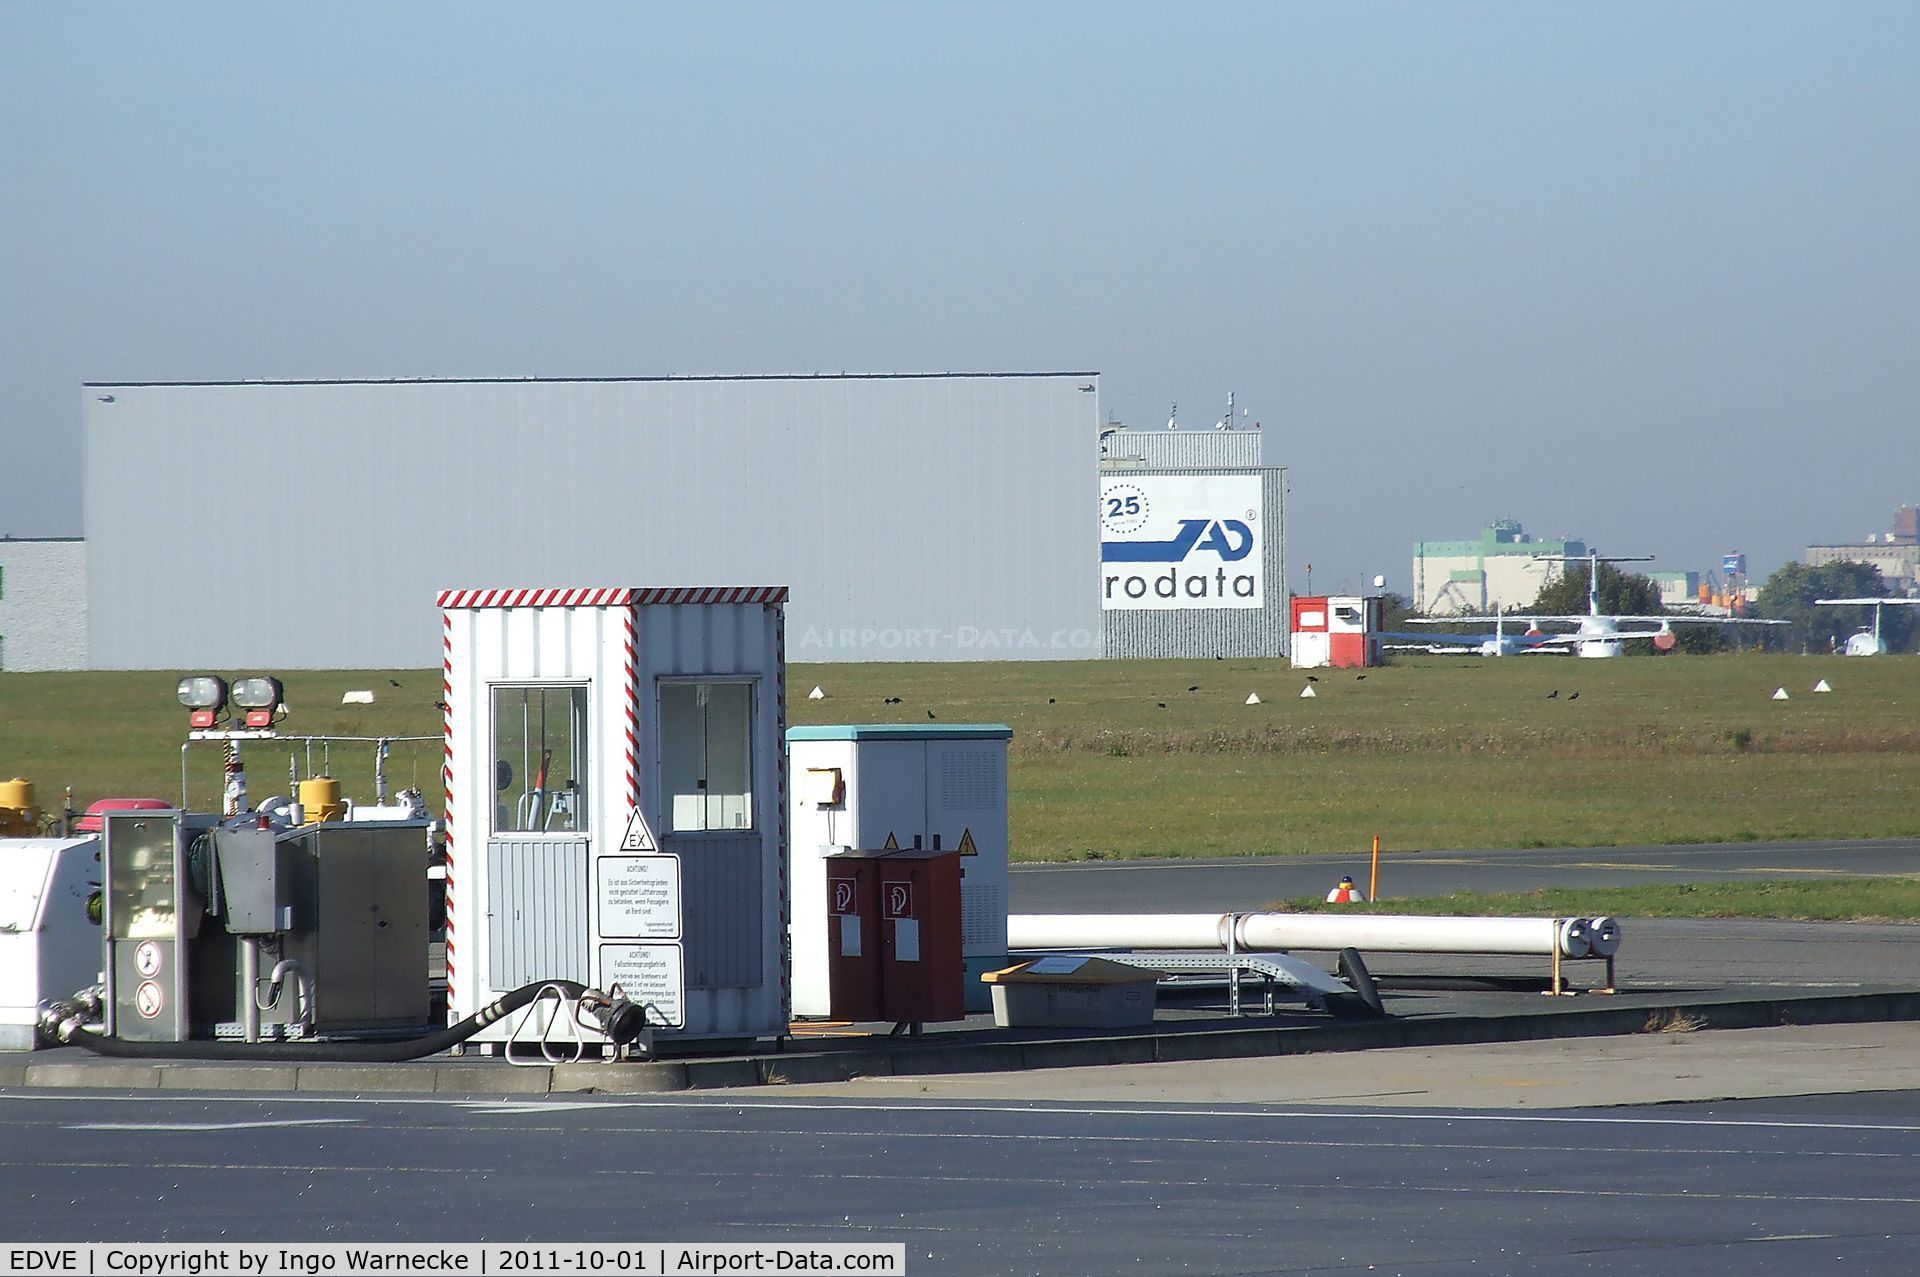 Braunschweig-Wolfsburg Regional Airport, Braunschweig, Lower Saxony Germany (EDVE) - looking towards the airfield fuelling station and the western section of the airport from the visitor's terrace at Braunschweig-Waggum airport